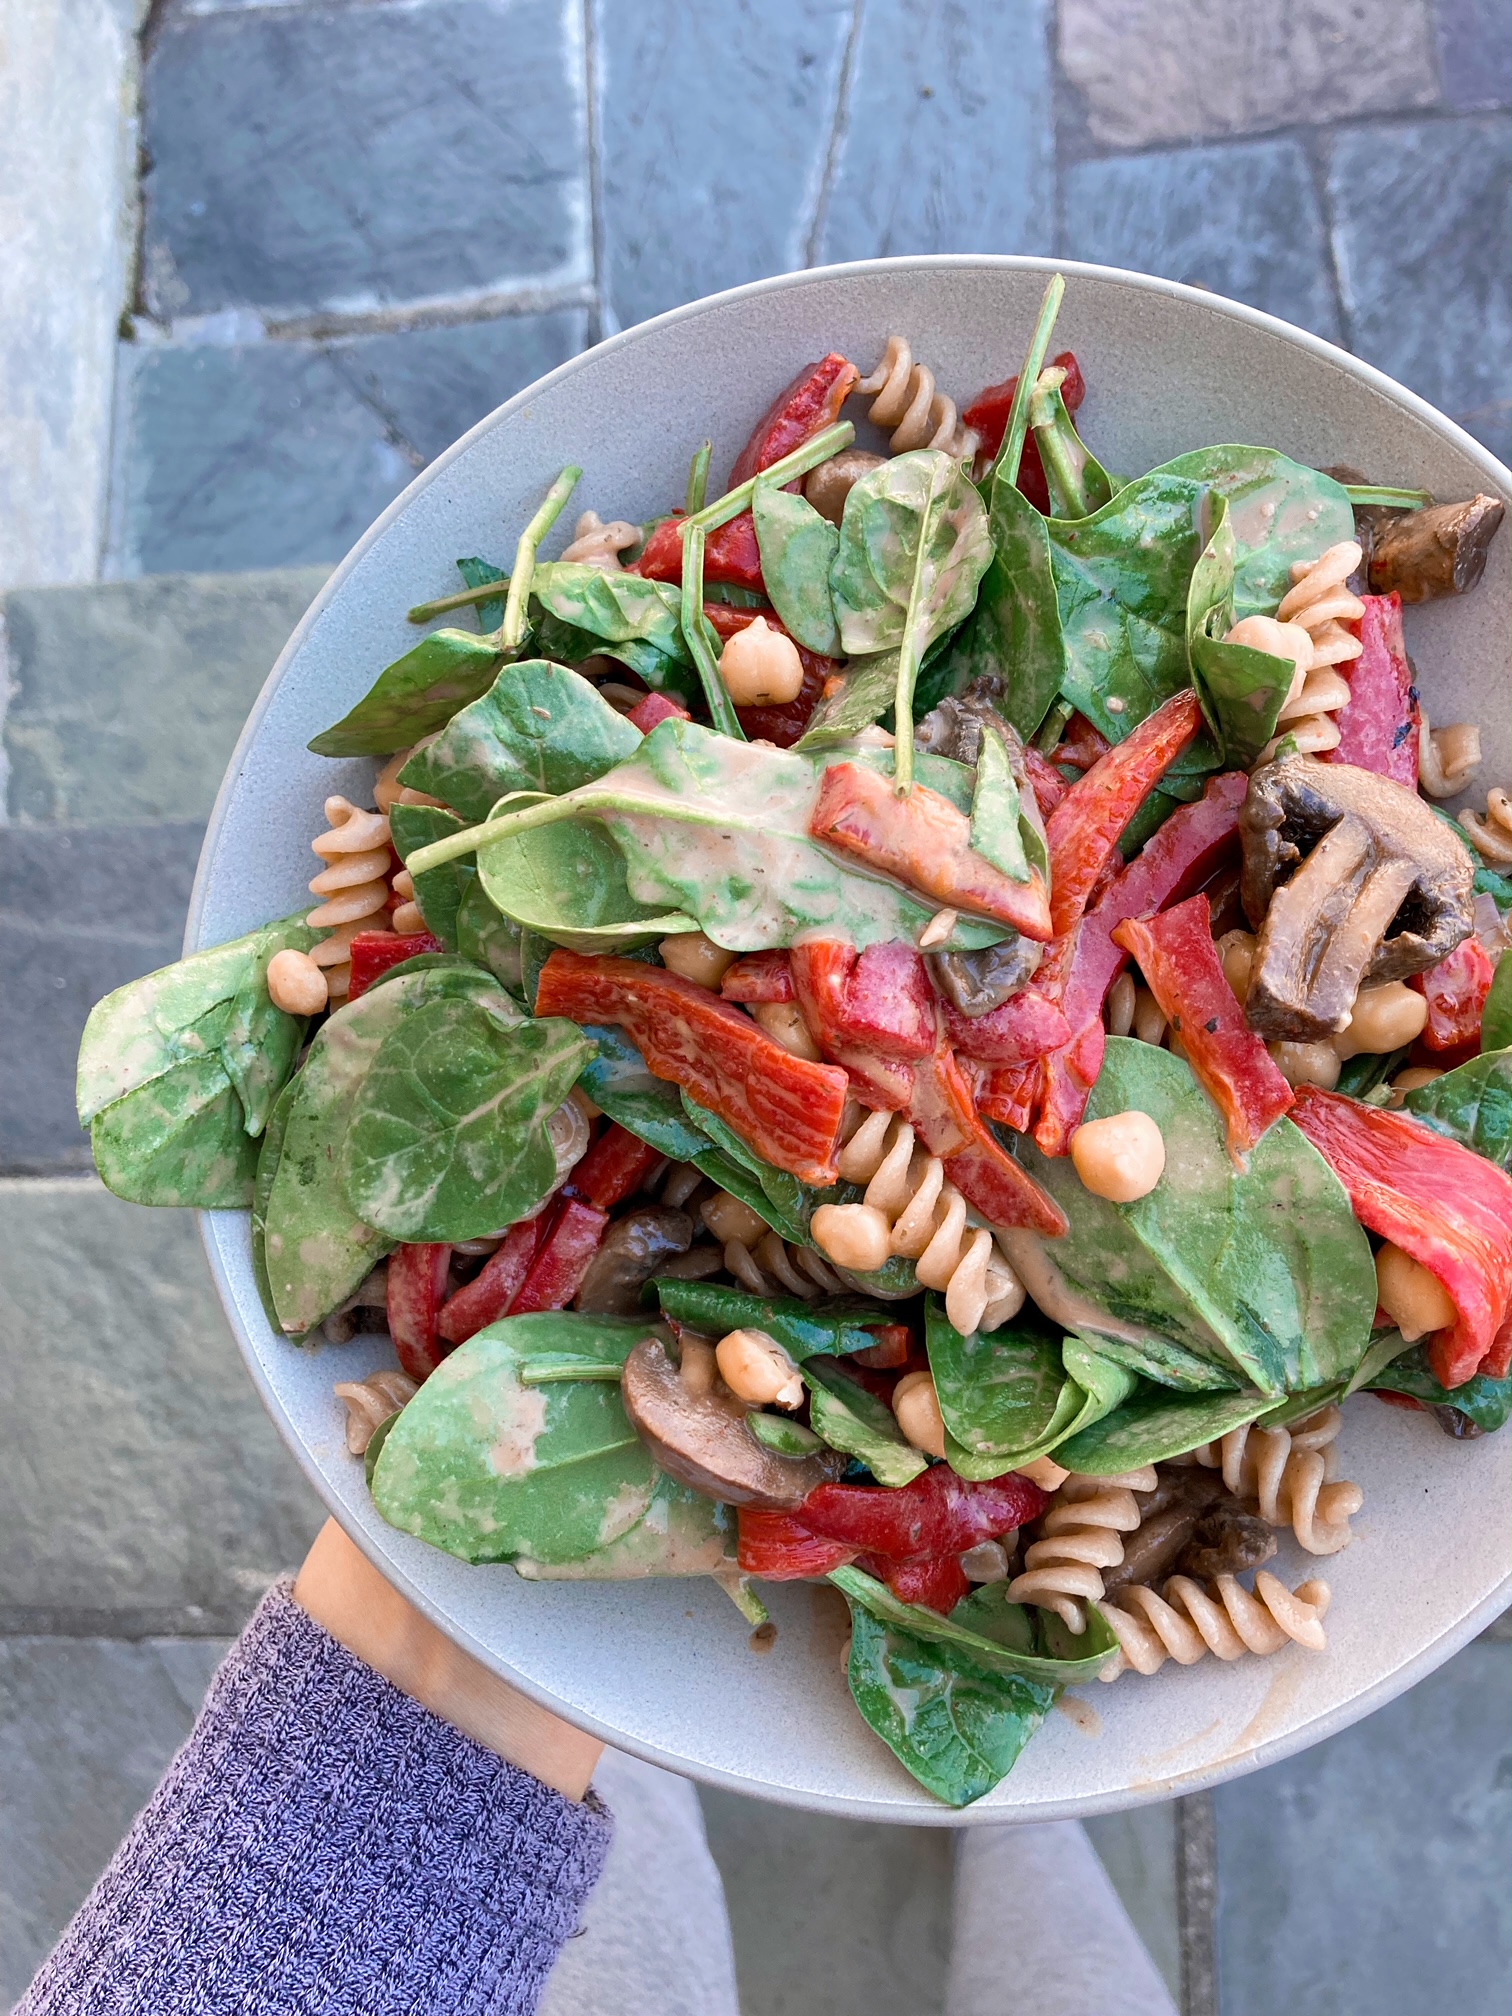 Plant-Based Meal Ideas: What I've Been Eating Lately